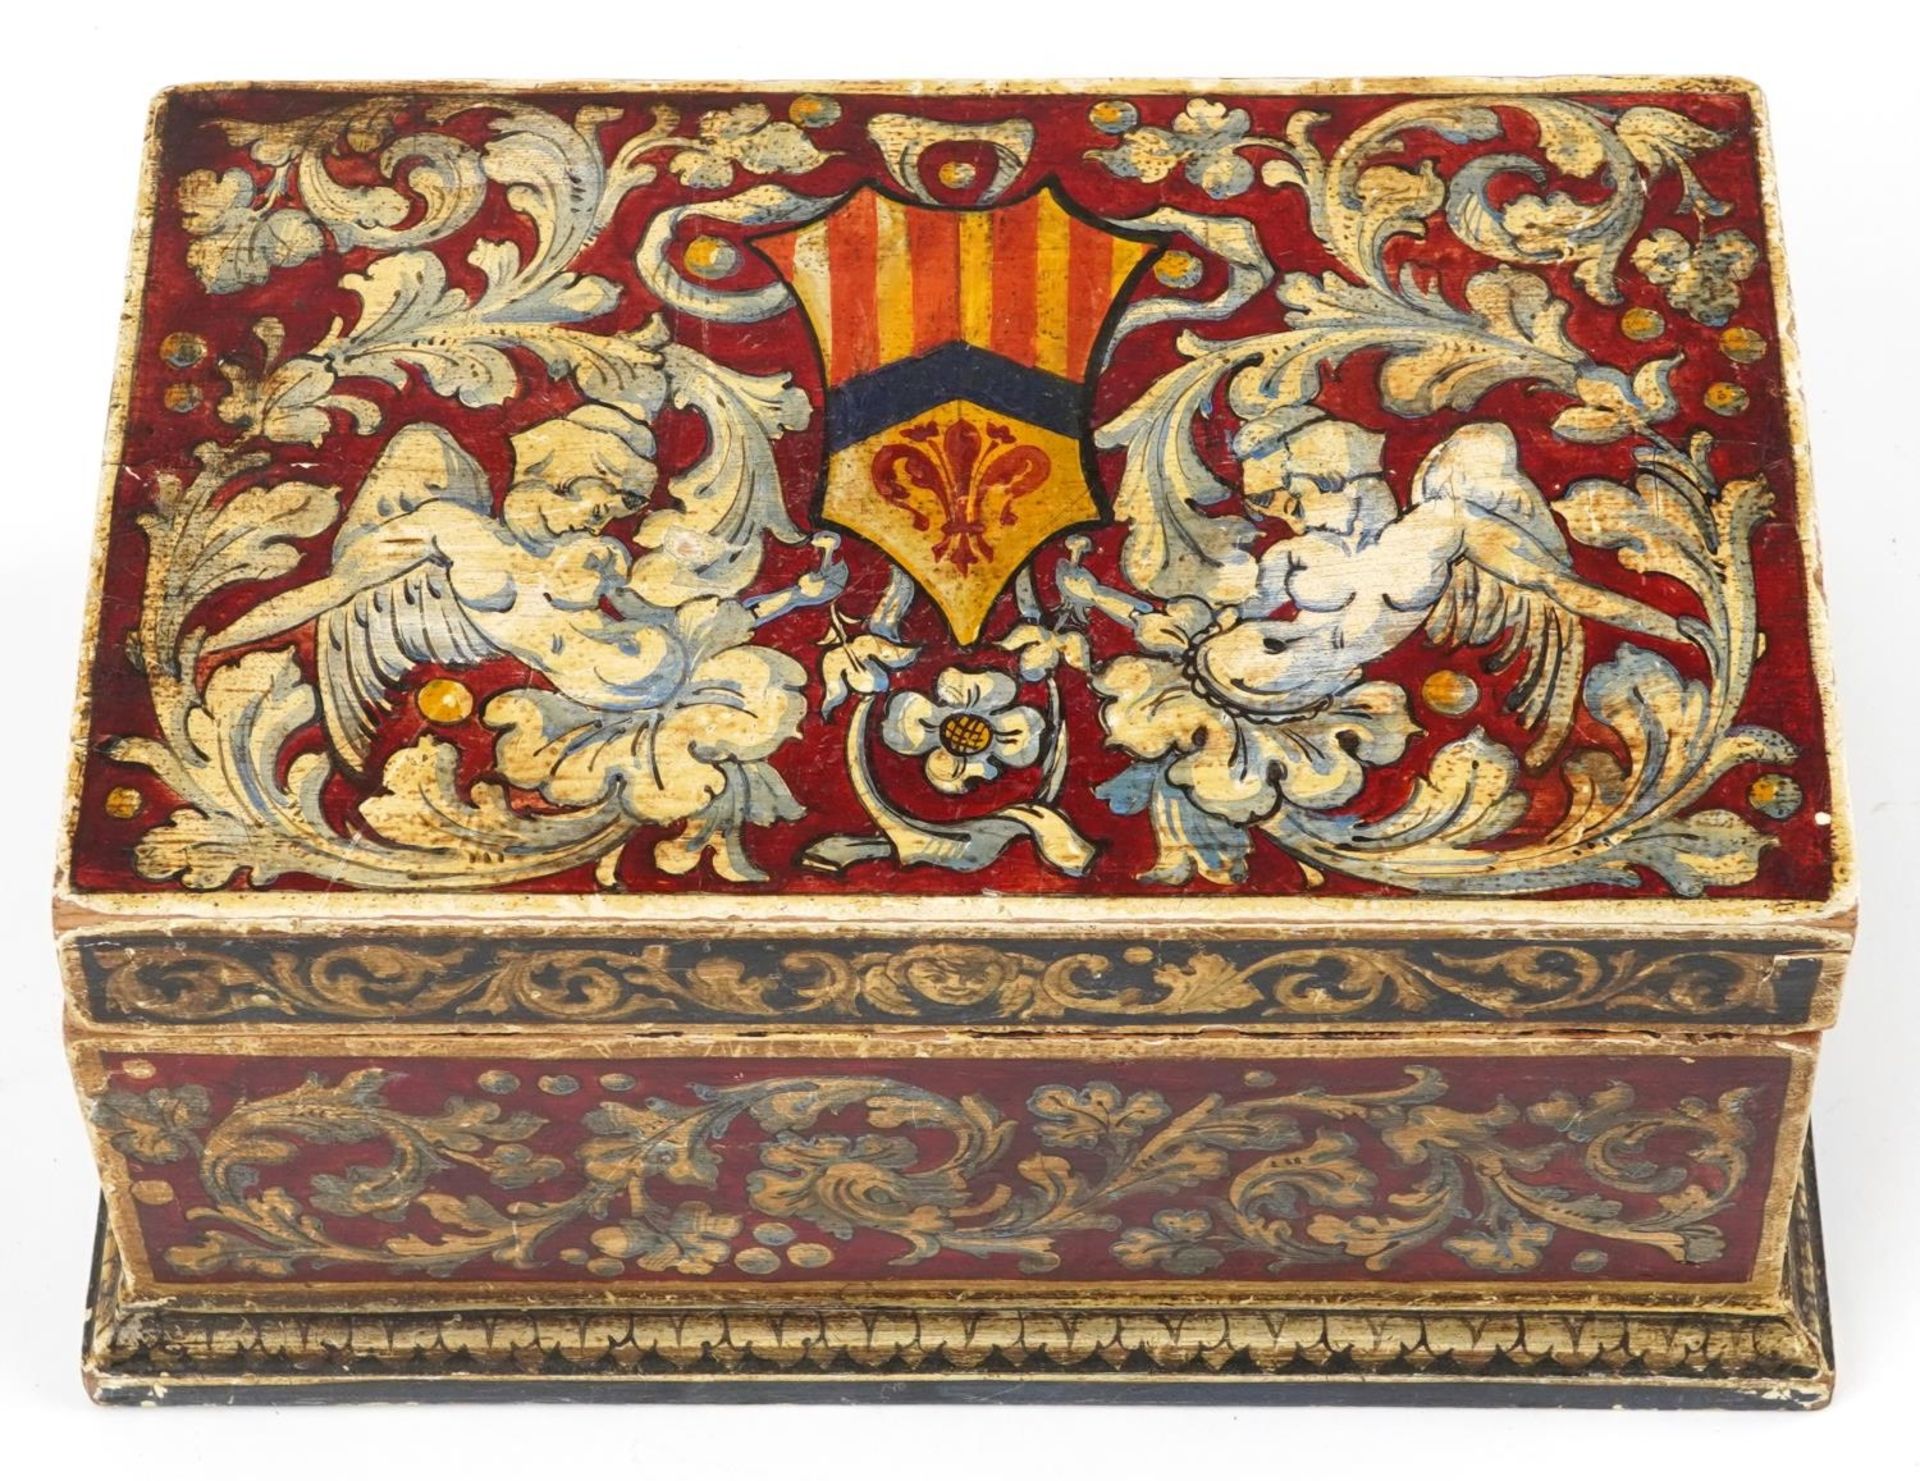 Antique pine table casket hand painted with gryphons and heraldic shield, 14cm H x 29.5cm W x 19cm D - Image 2 of 4